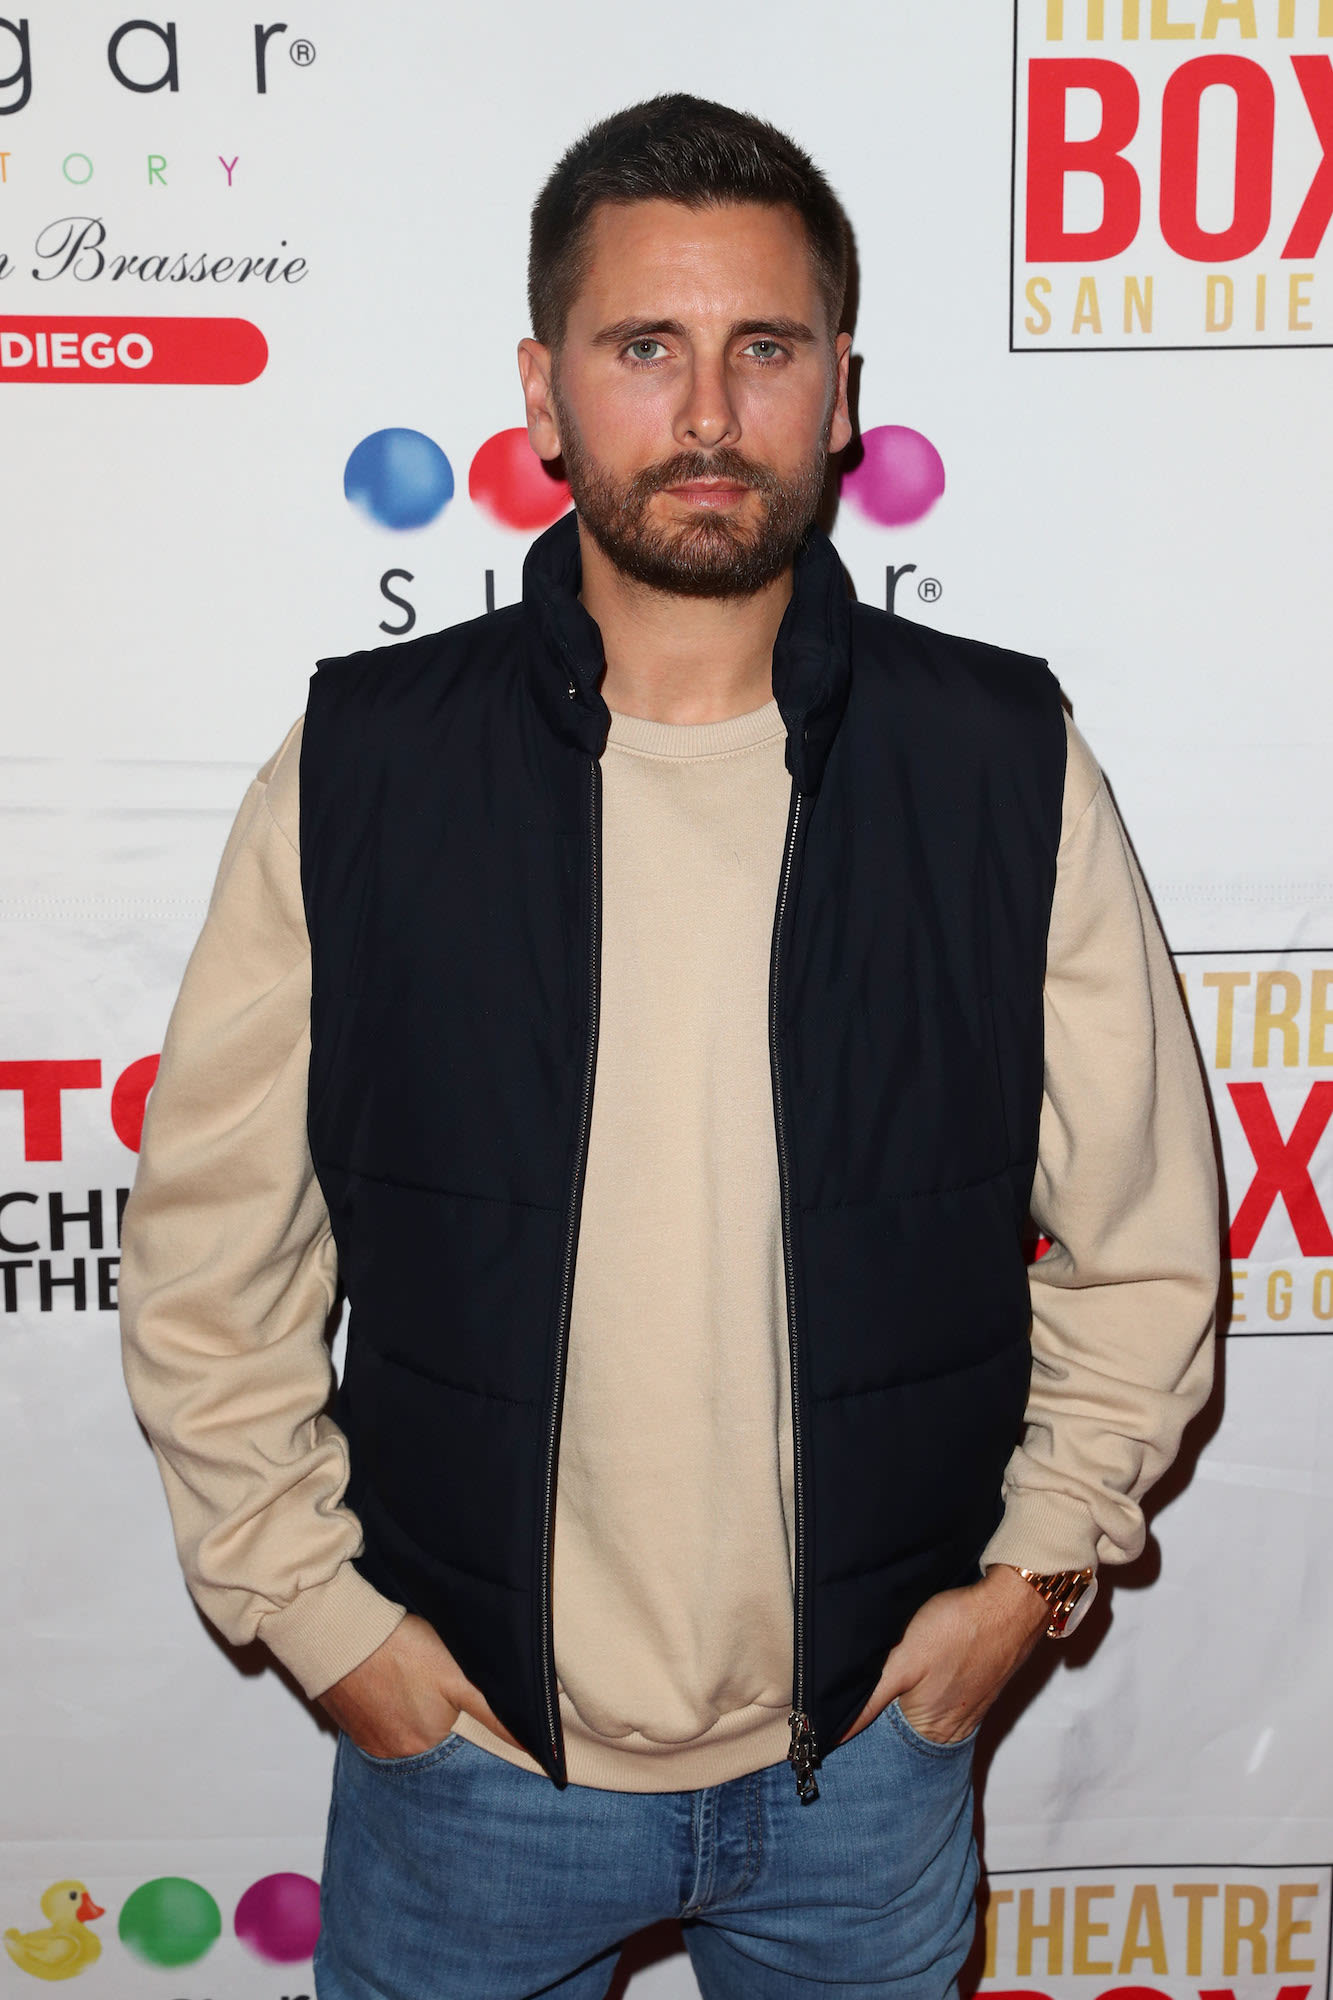 Scott Disick Finds Out How Past Use of ‘Drugs and Alcohol’ Aged Him: ‘I Was Going Pretty Heavy’